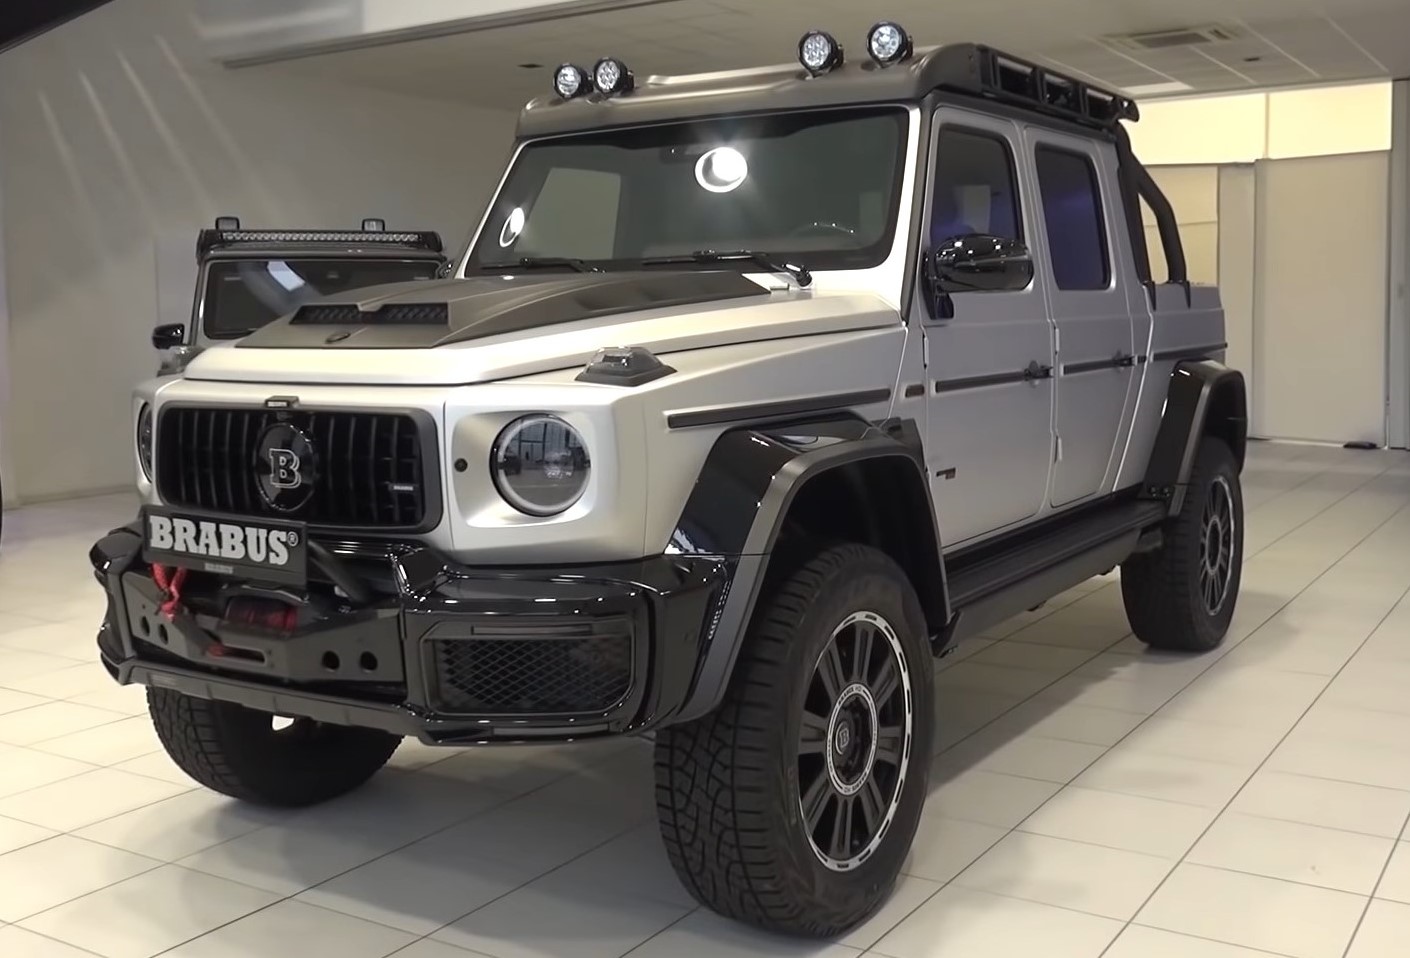 Brabus 800 Adventure XLP is the ultimate AMG G63 😍😍👍👍 #CARS #TopCars #SexyCars #MuscleCars #CarsMagazine